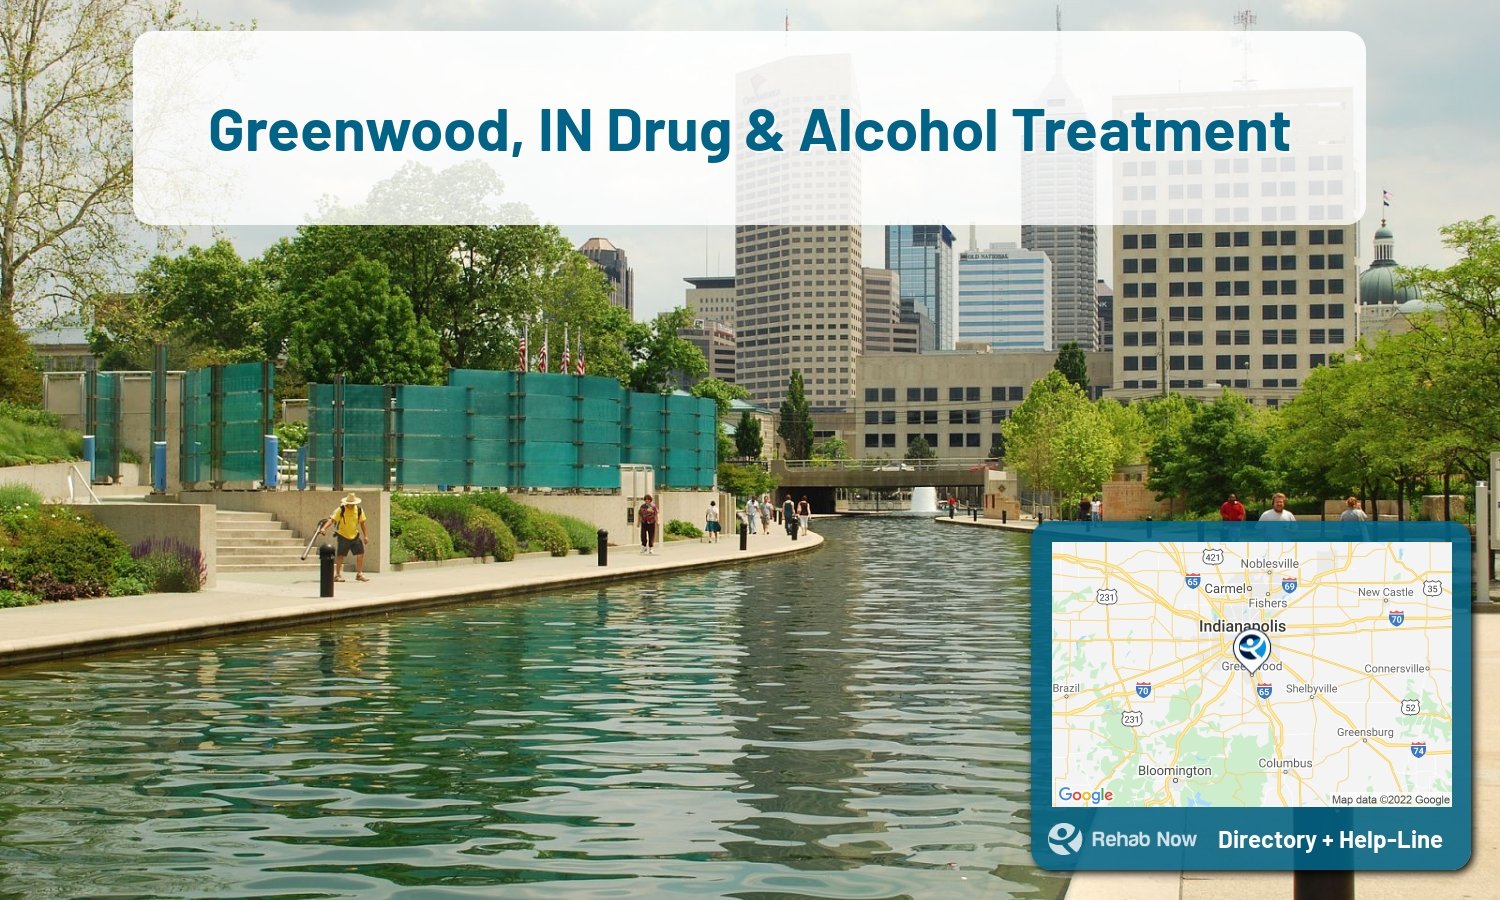 Ready to pick a rehab center in Greenwood? Get off alcohol, opiates, and other drugs, by selecting top drug rehab centers in Indiana